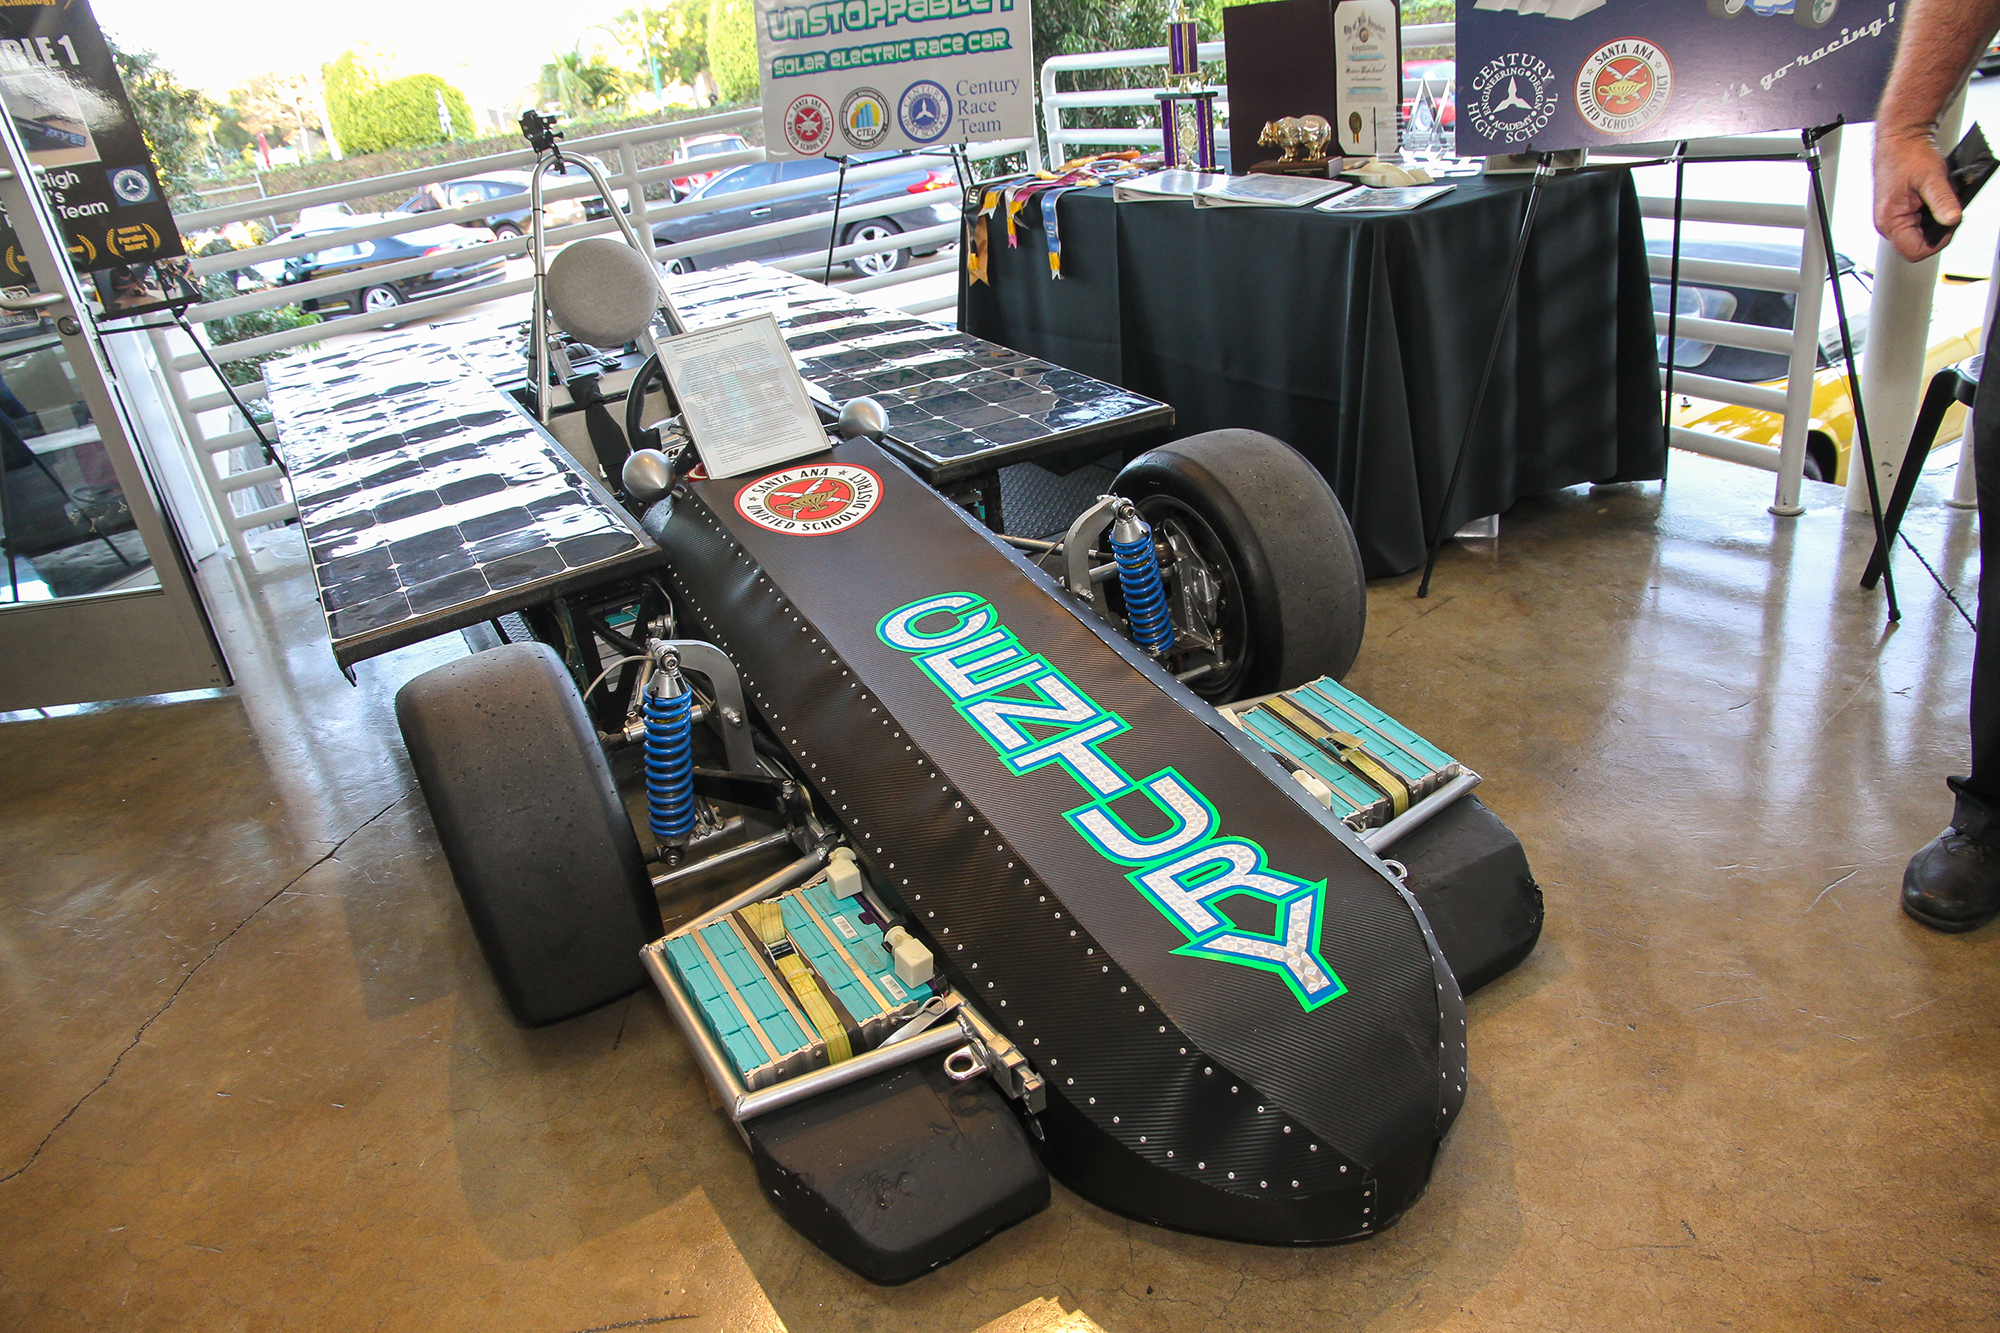 Unstoppable 1 solar electric race car